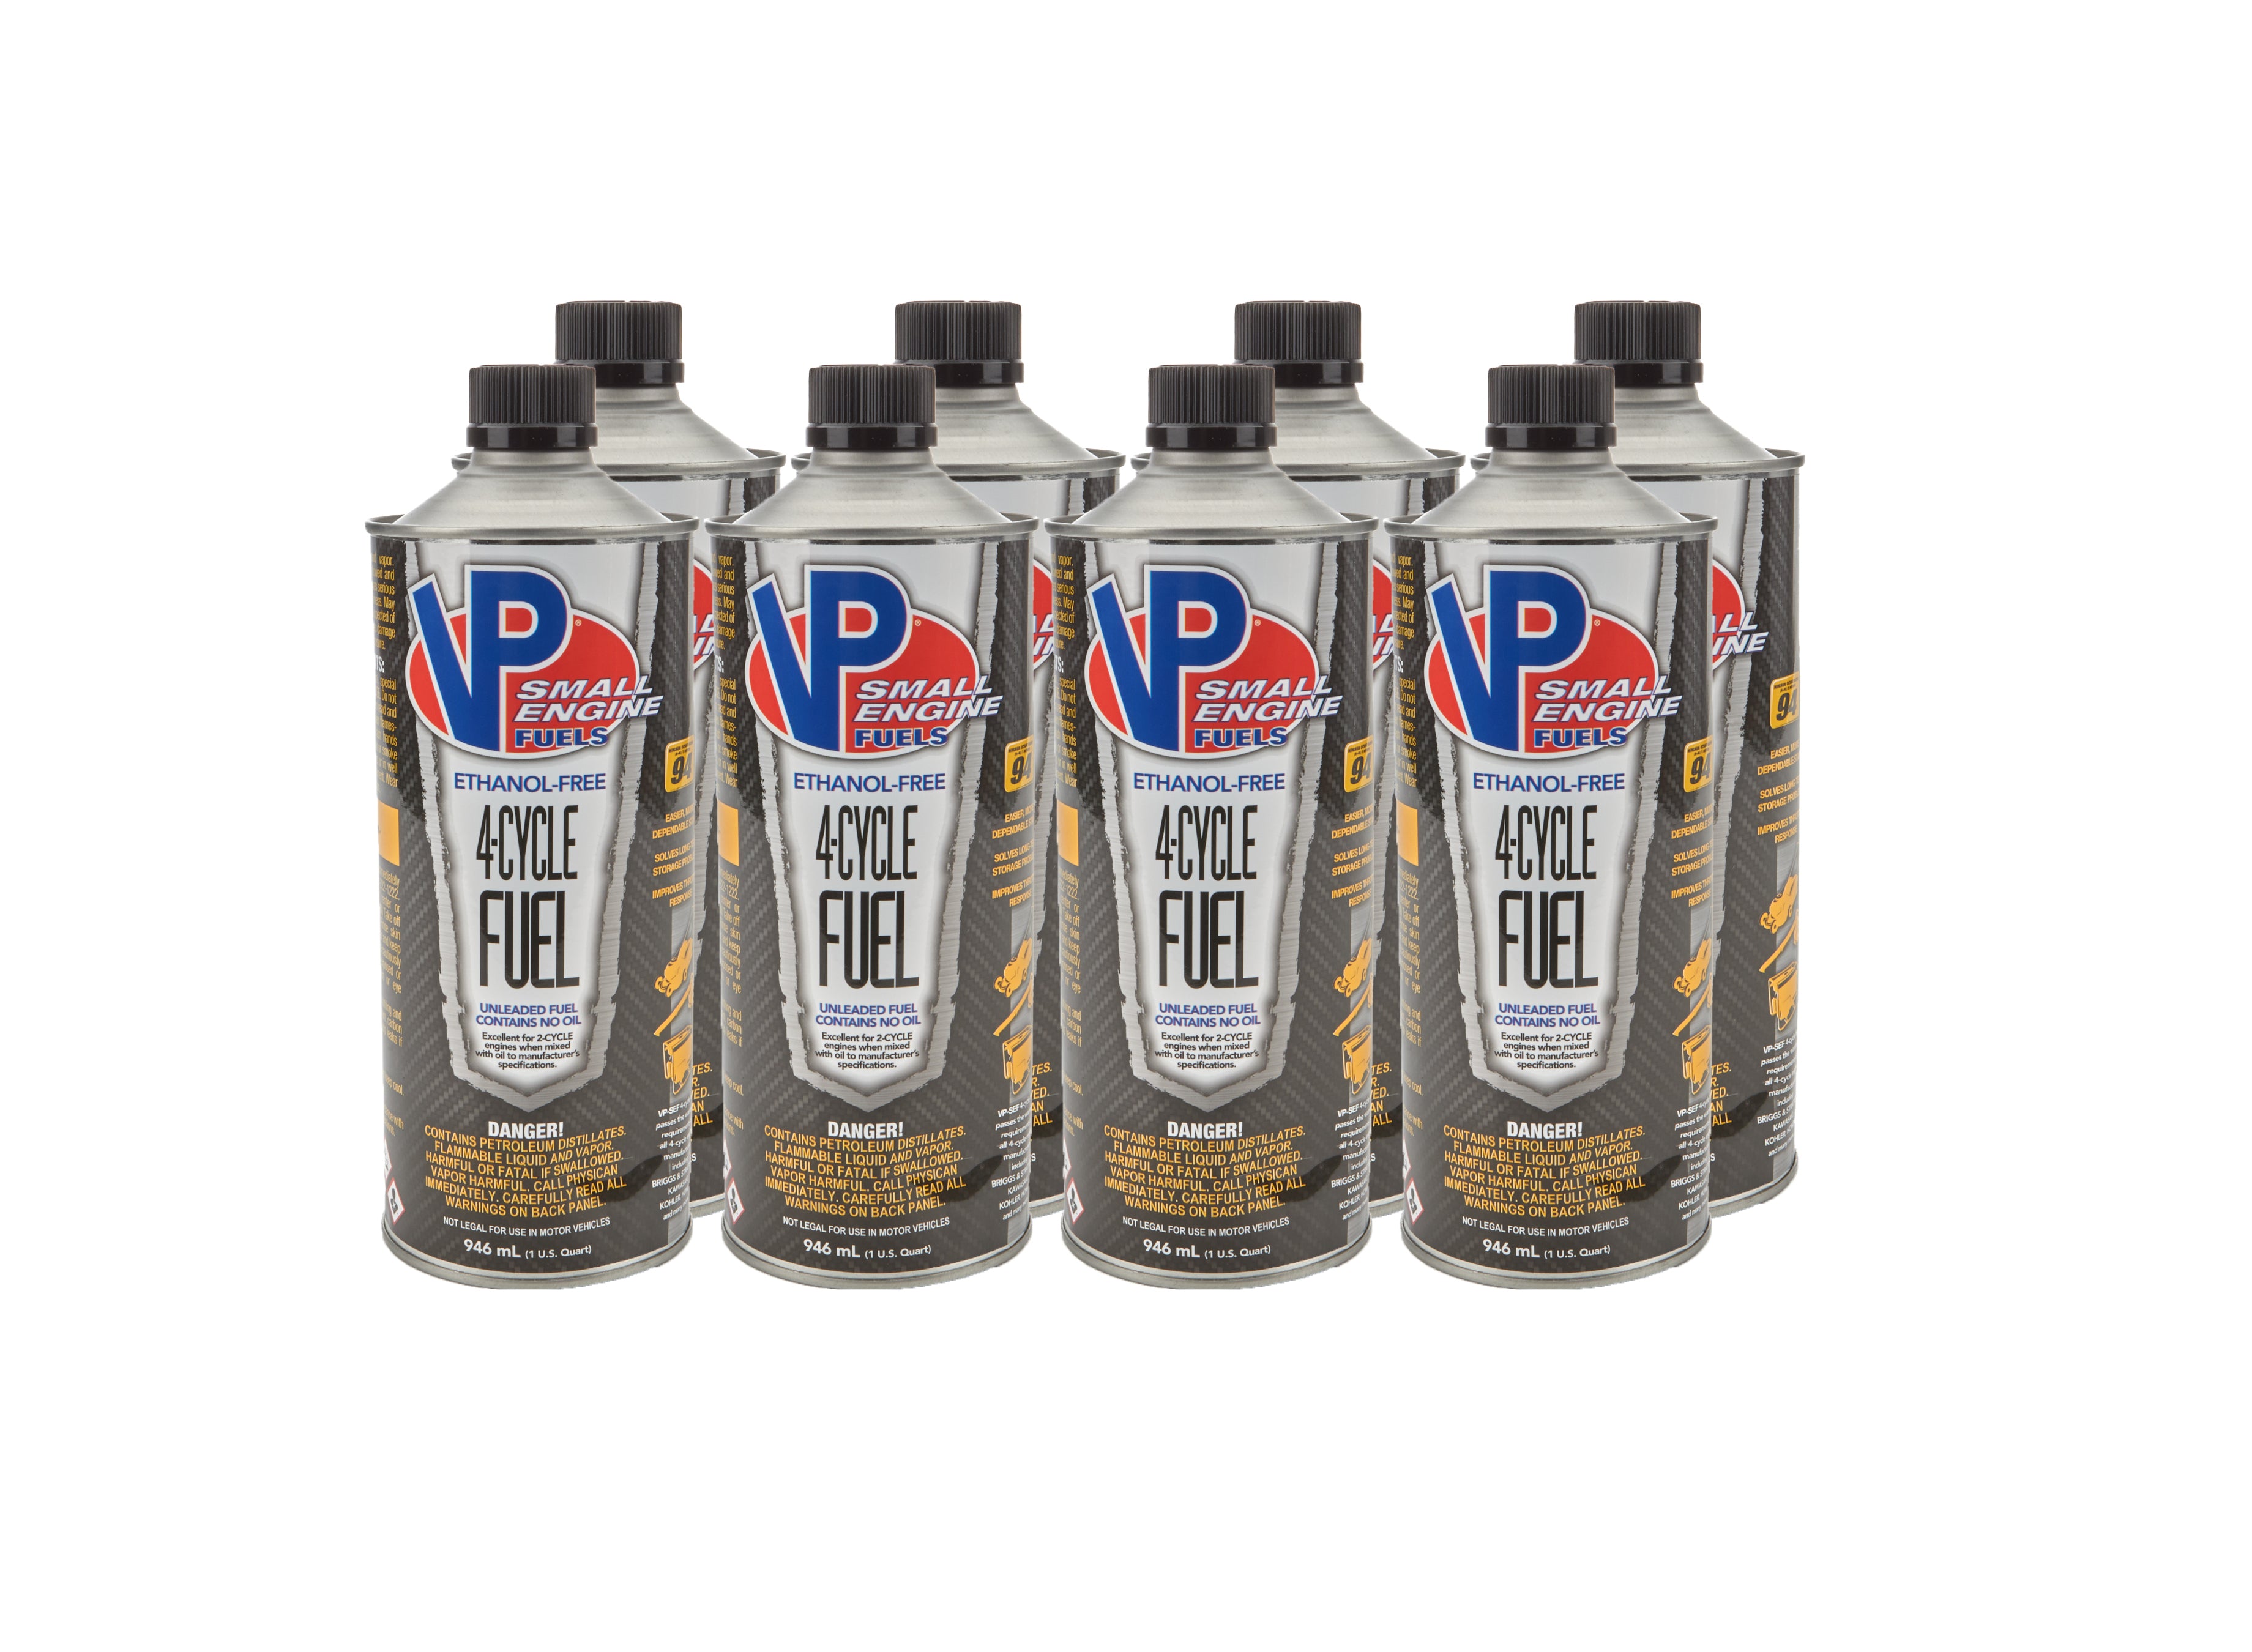 VP Racing 4 Cycle Fuel 1qt Cans (Case 8) Fuels Leaded Fuel main image